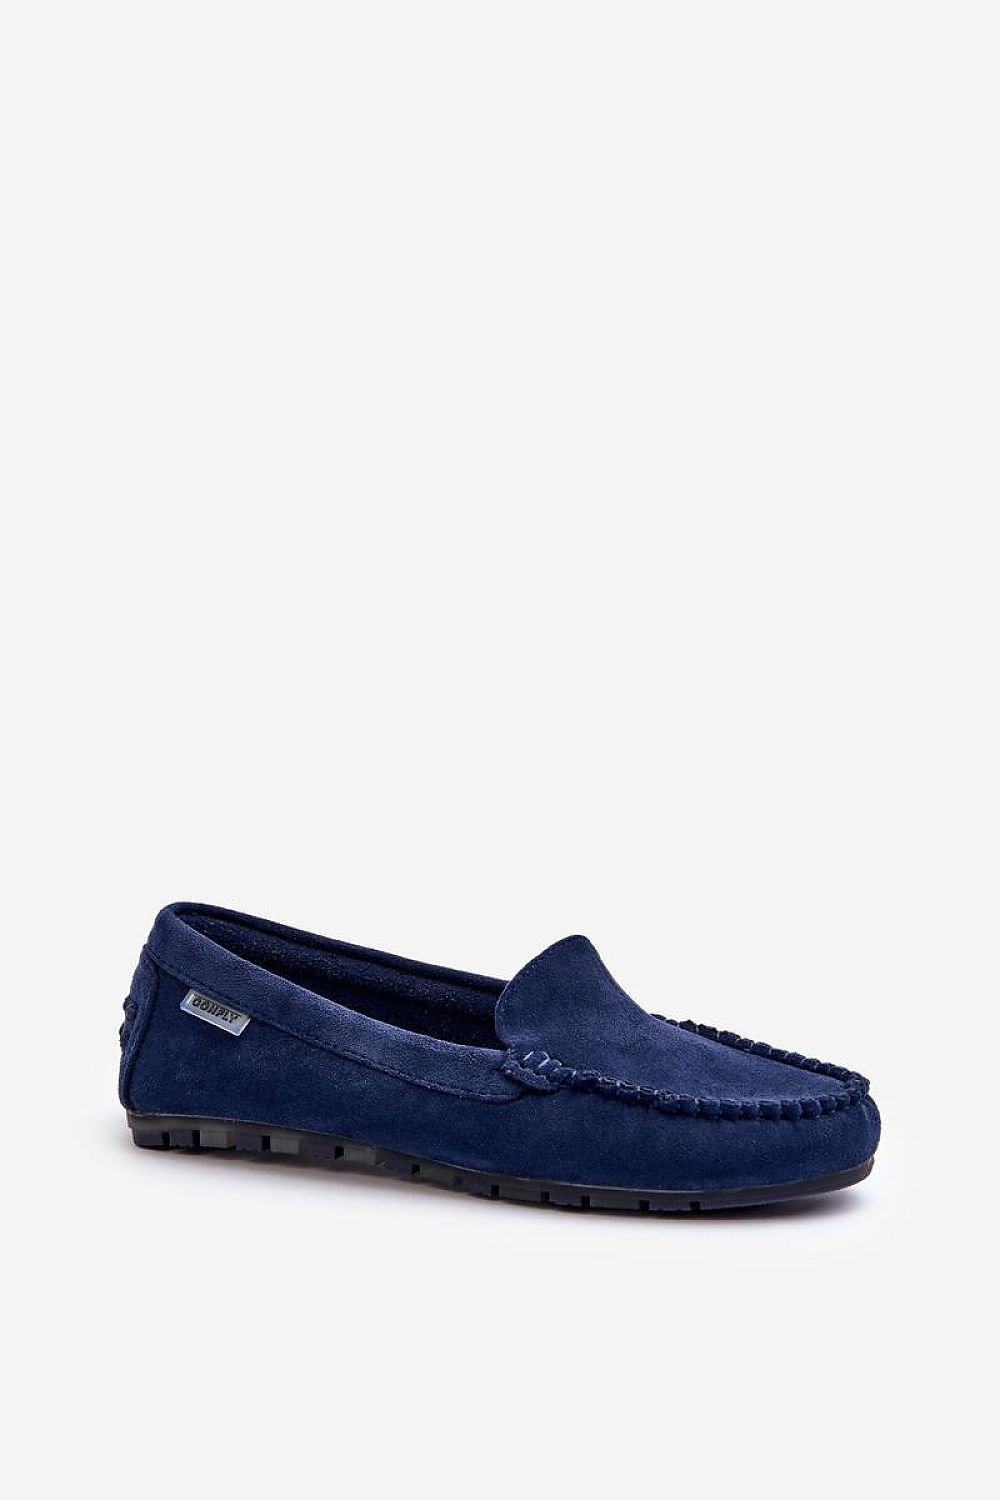 TEEK - Soft Smooth Top Mocassin Loafers SHOES TEEK MH navy blue 6.5 